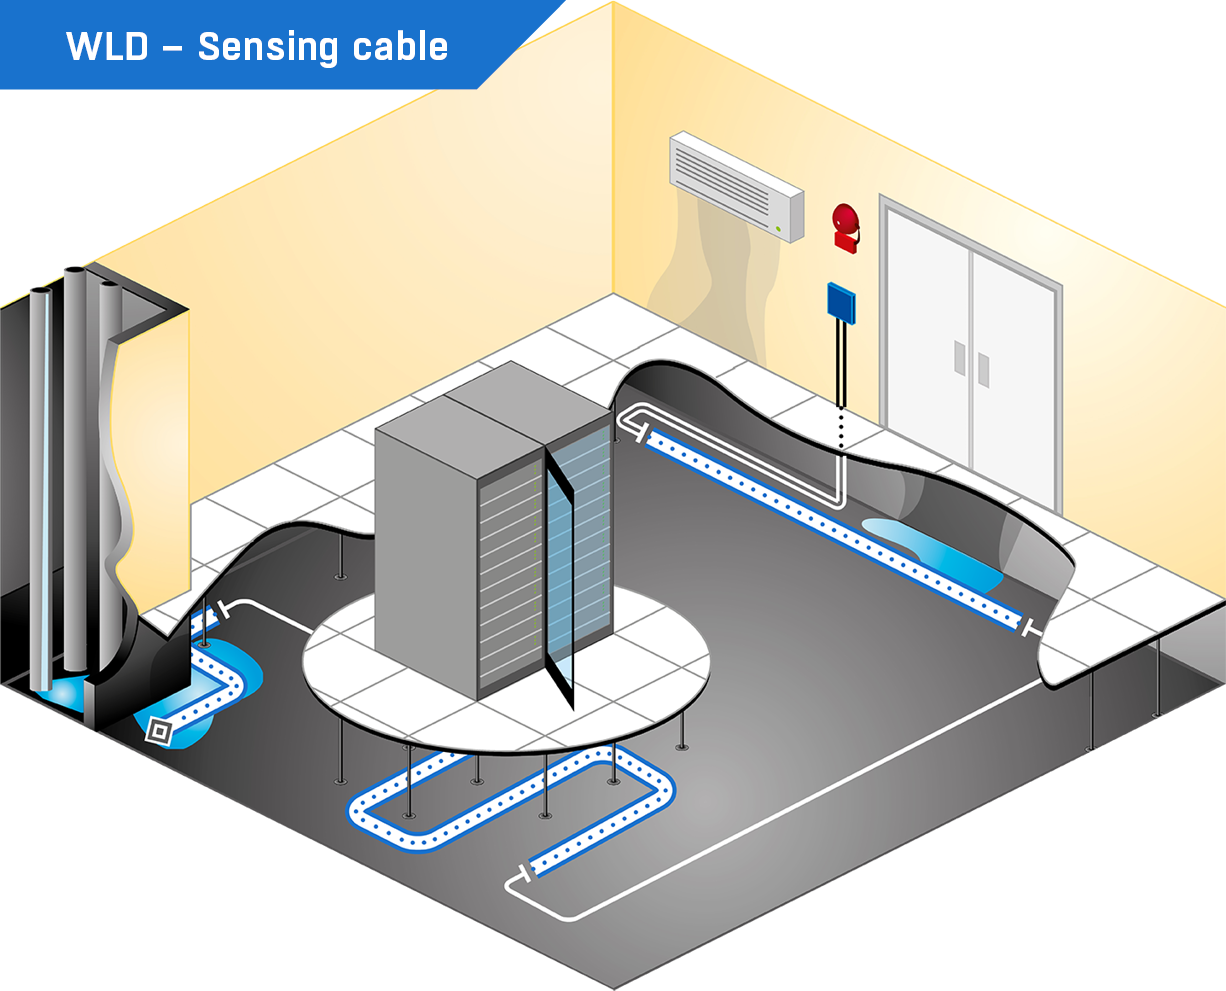 WLD Water Leak detection using sensing cable in server room. Installation under the raised floors.